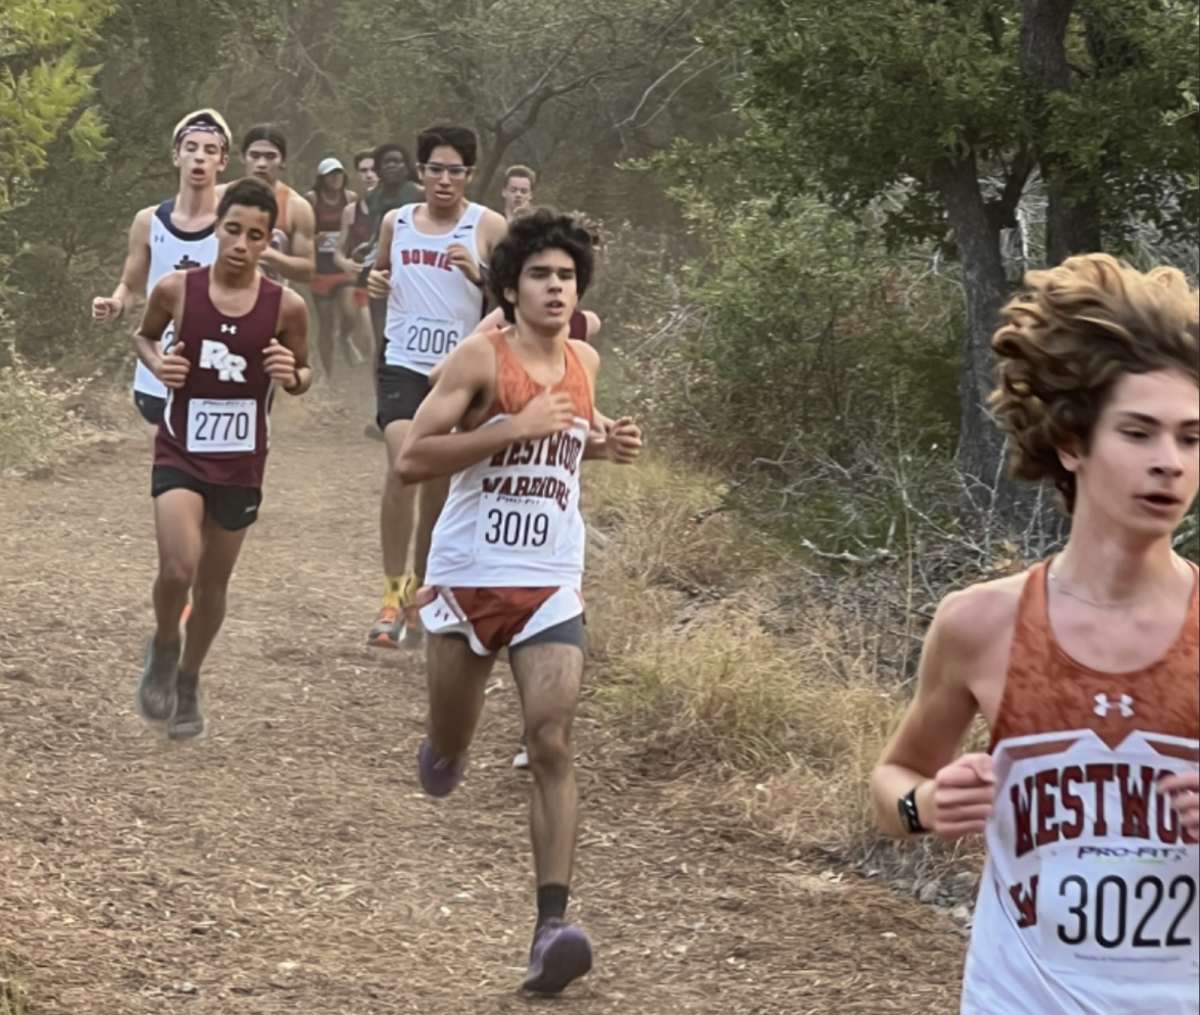 Storming through the course, the Westwood cross country team competes in their first meet of the season at Vista Ridge. The Warriors looked to start off their season strong with a good performance all around. 